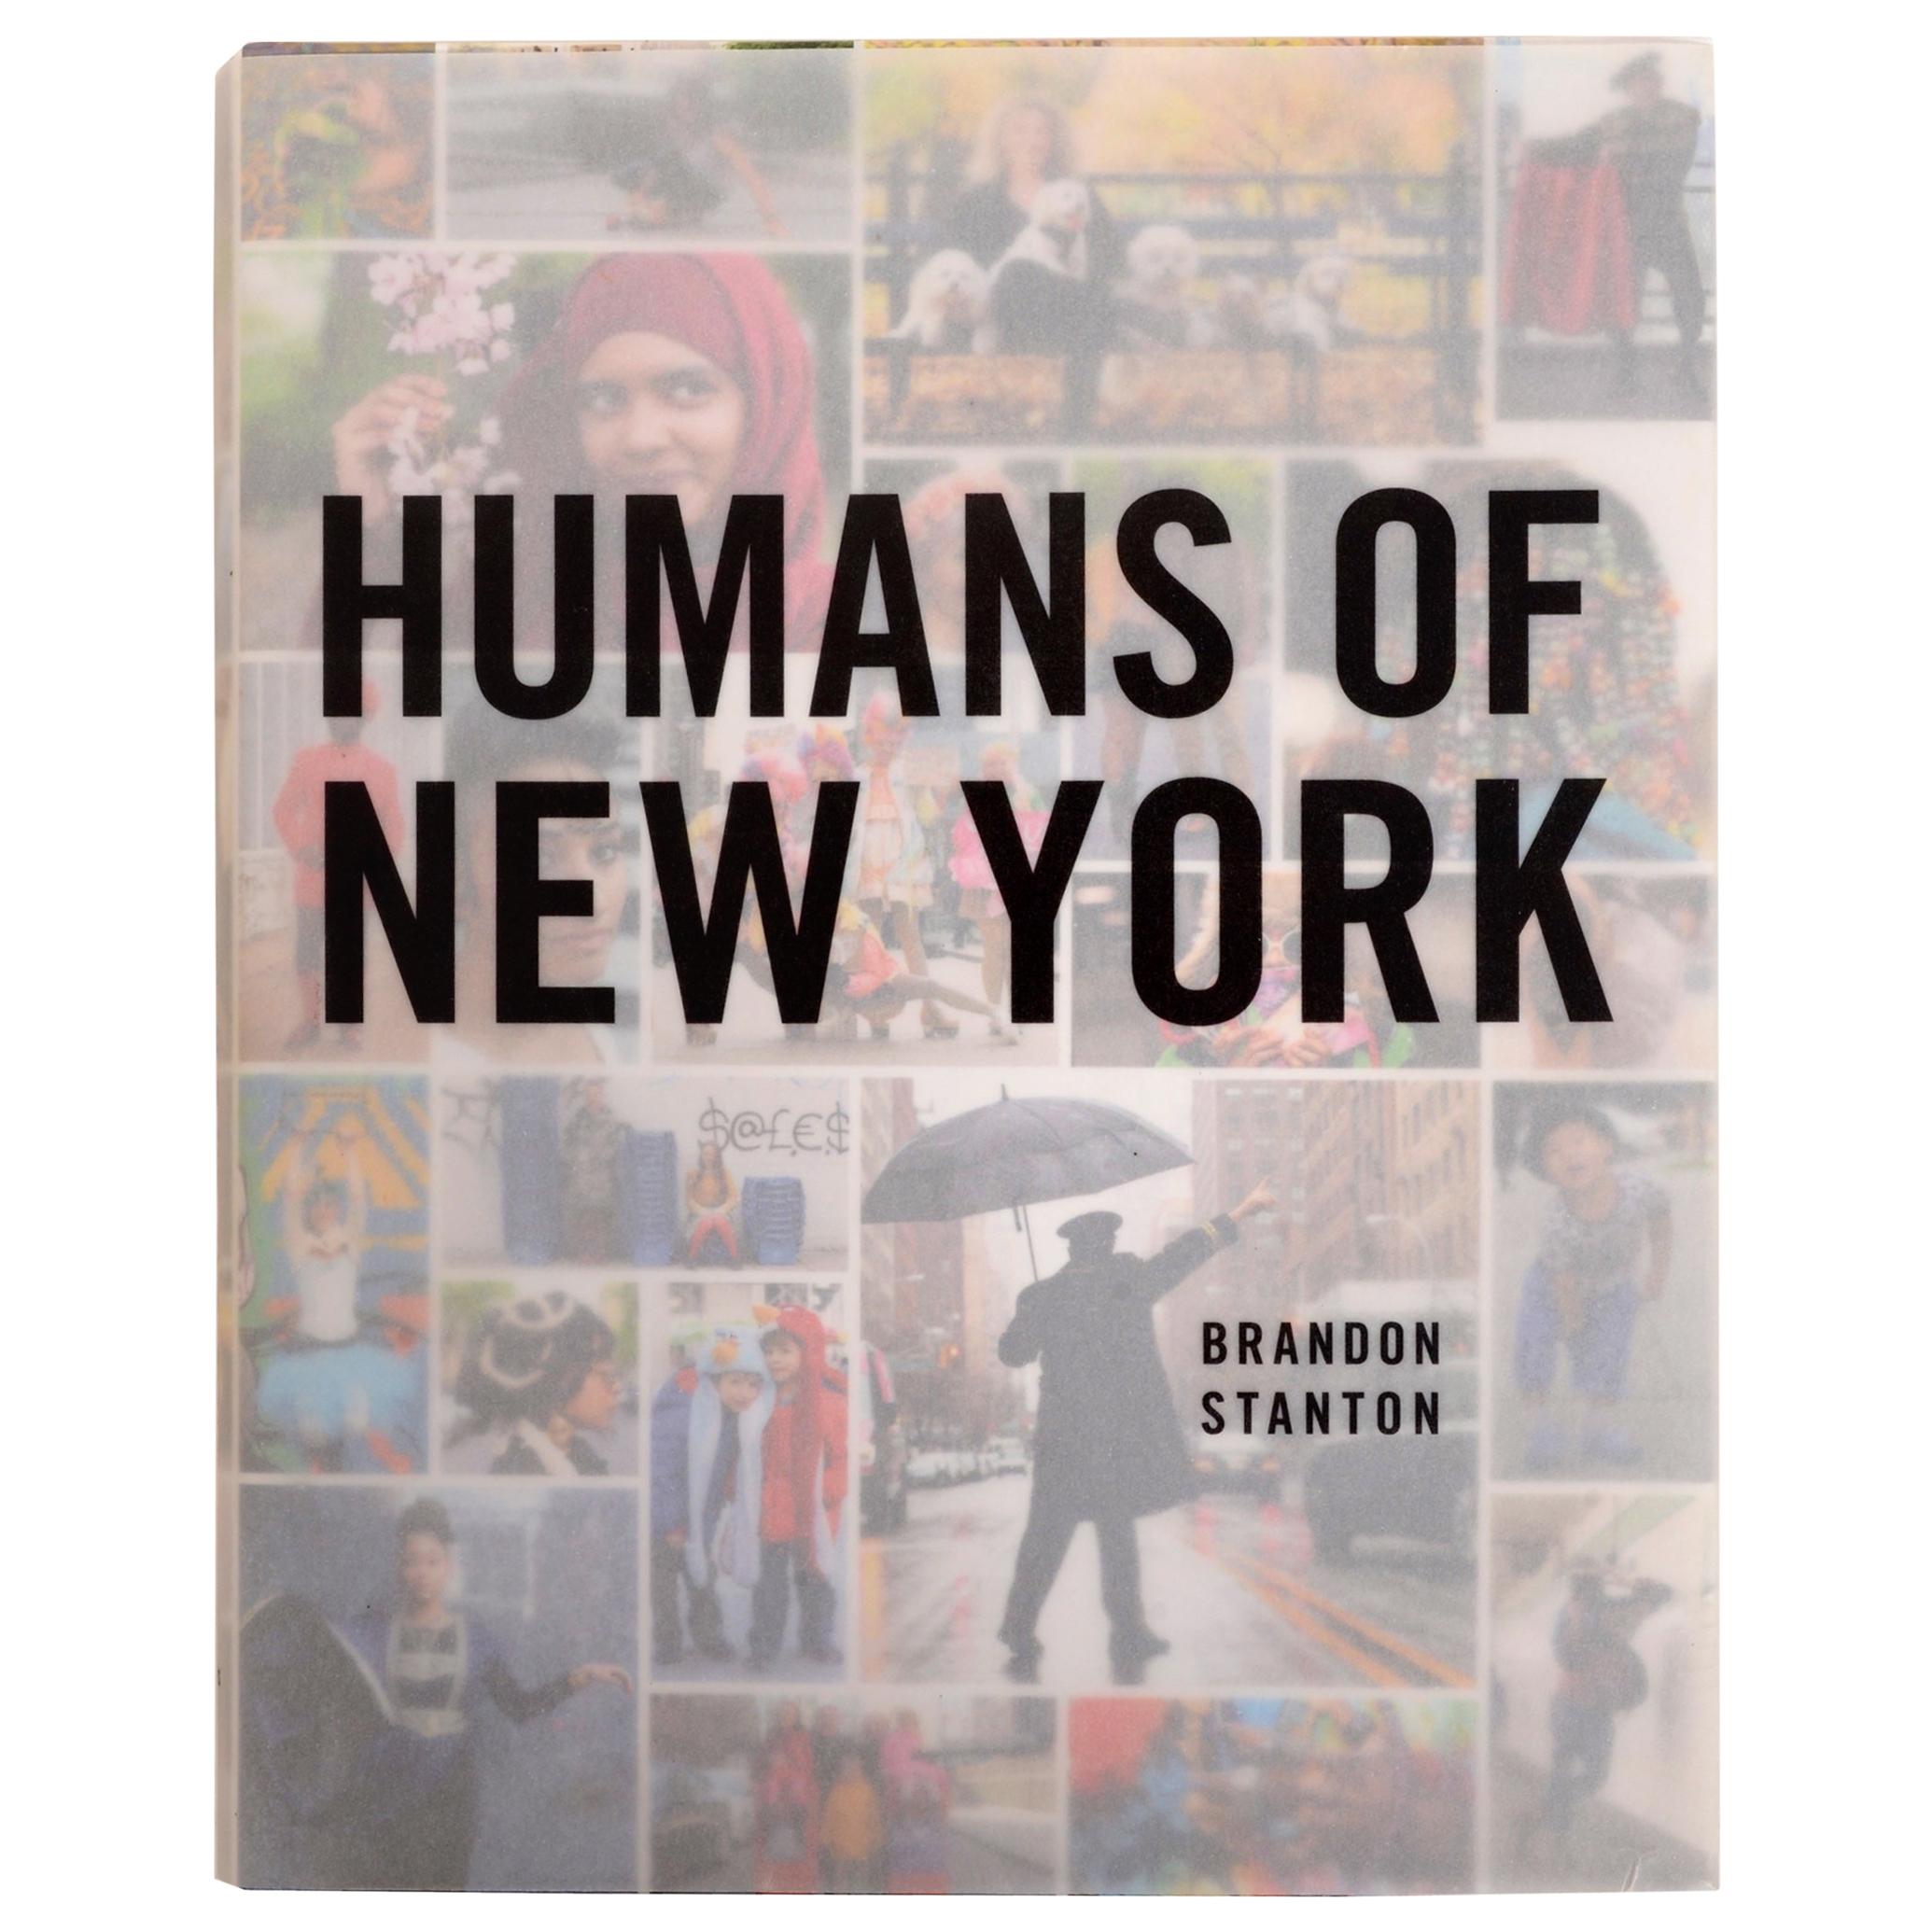 Humans of New York by Brandon Stanton, Stated First Edition